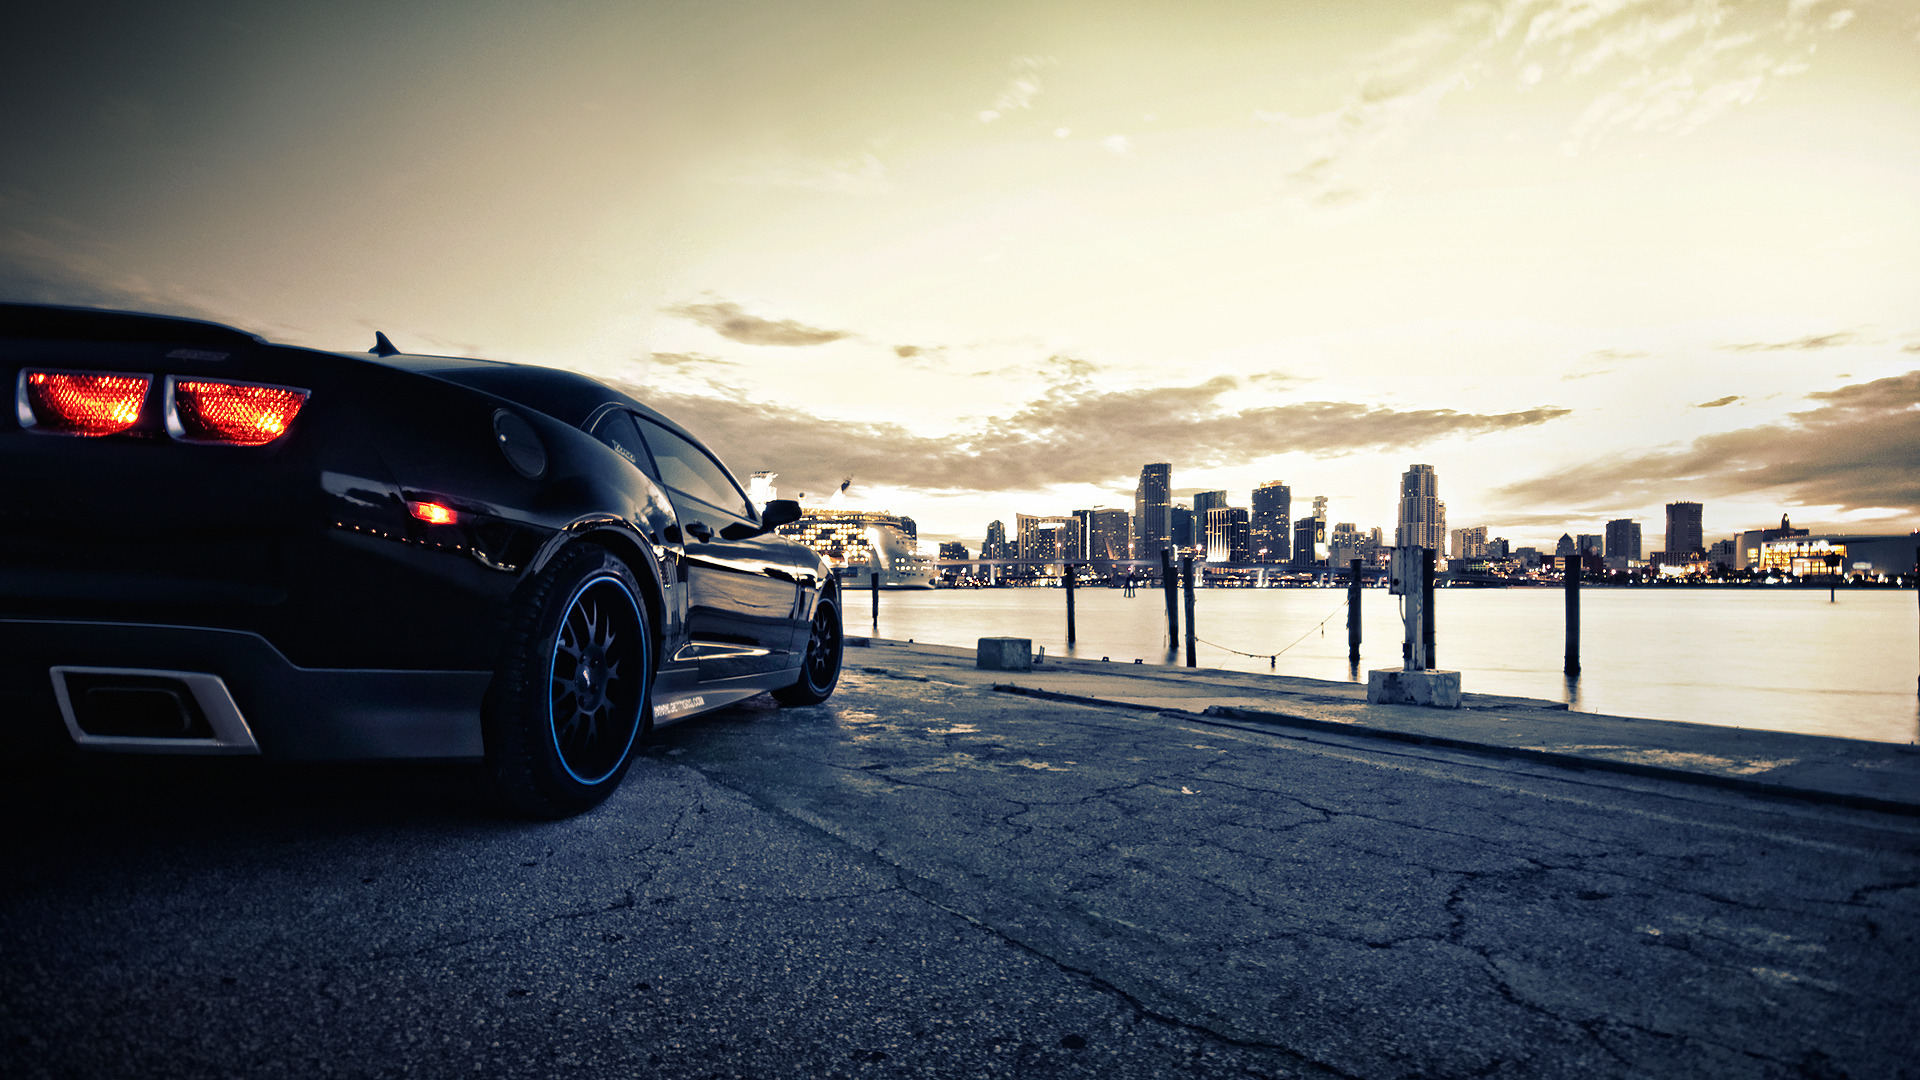 chevrolet, Camaro, Ss, Vehicles, Cars, Auto, Chevy, Roads, Brake, Lights, Exhaust, Wheels, Muscle, Bay, Ocean, Sea, Water, Cities, Skyline, Cityscape, Scapes, Sky, Clouds, Architecture, Buildings, Skyscrapers, Sc Wallpaper